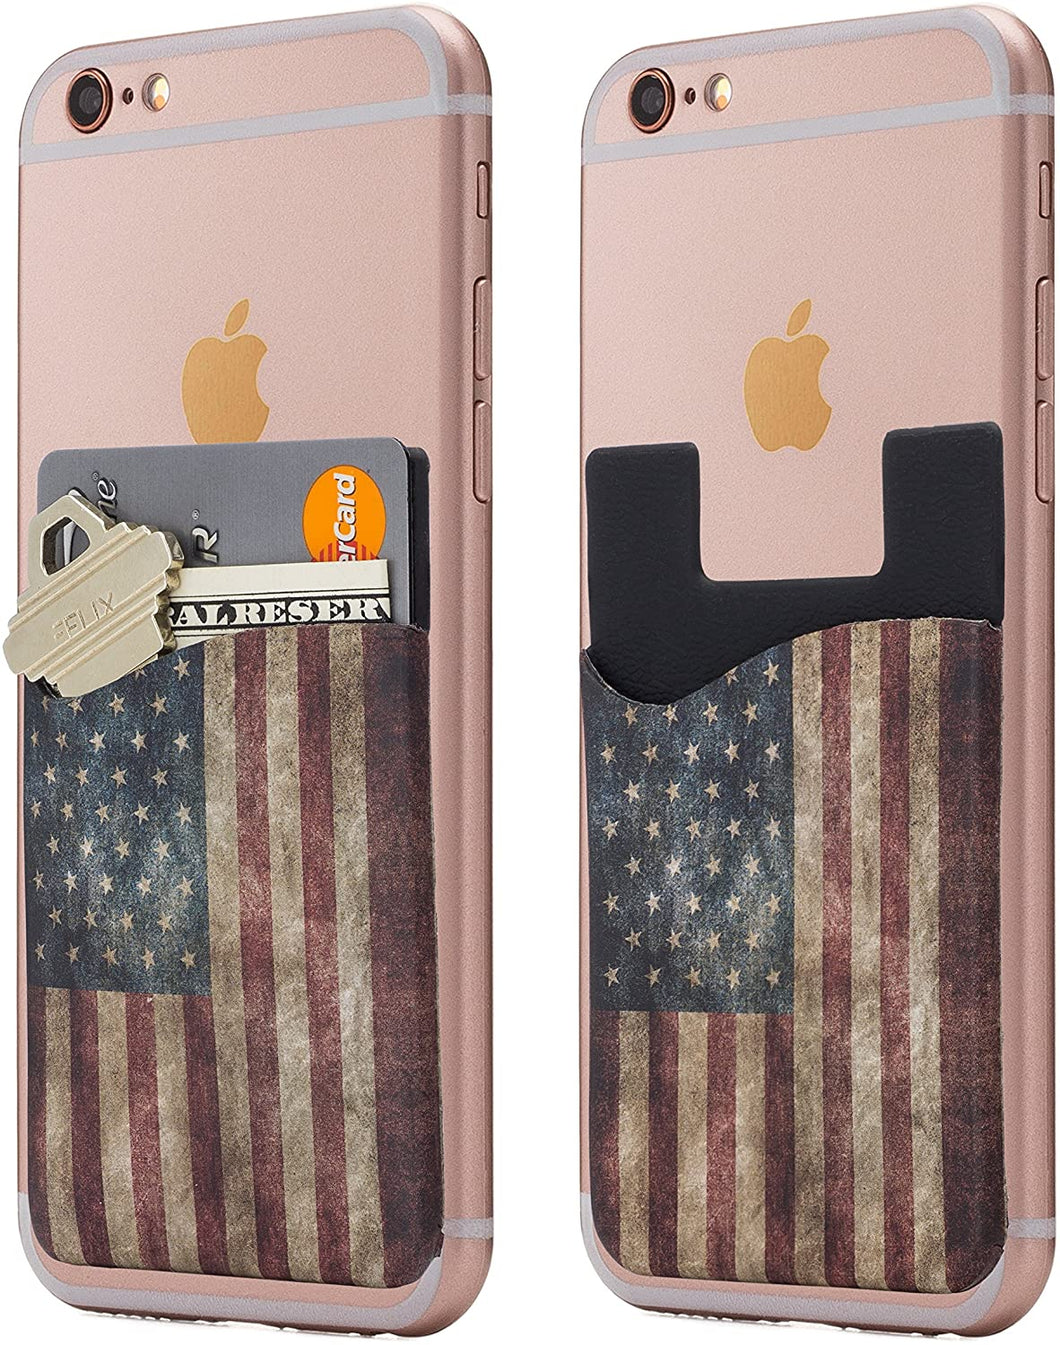 (Two) Dark American Flag Cell Phone Stick on Wallet Card Holder Phone Pocket for iPhone, Android and All Smartphones